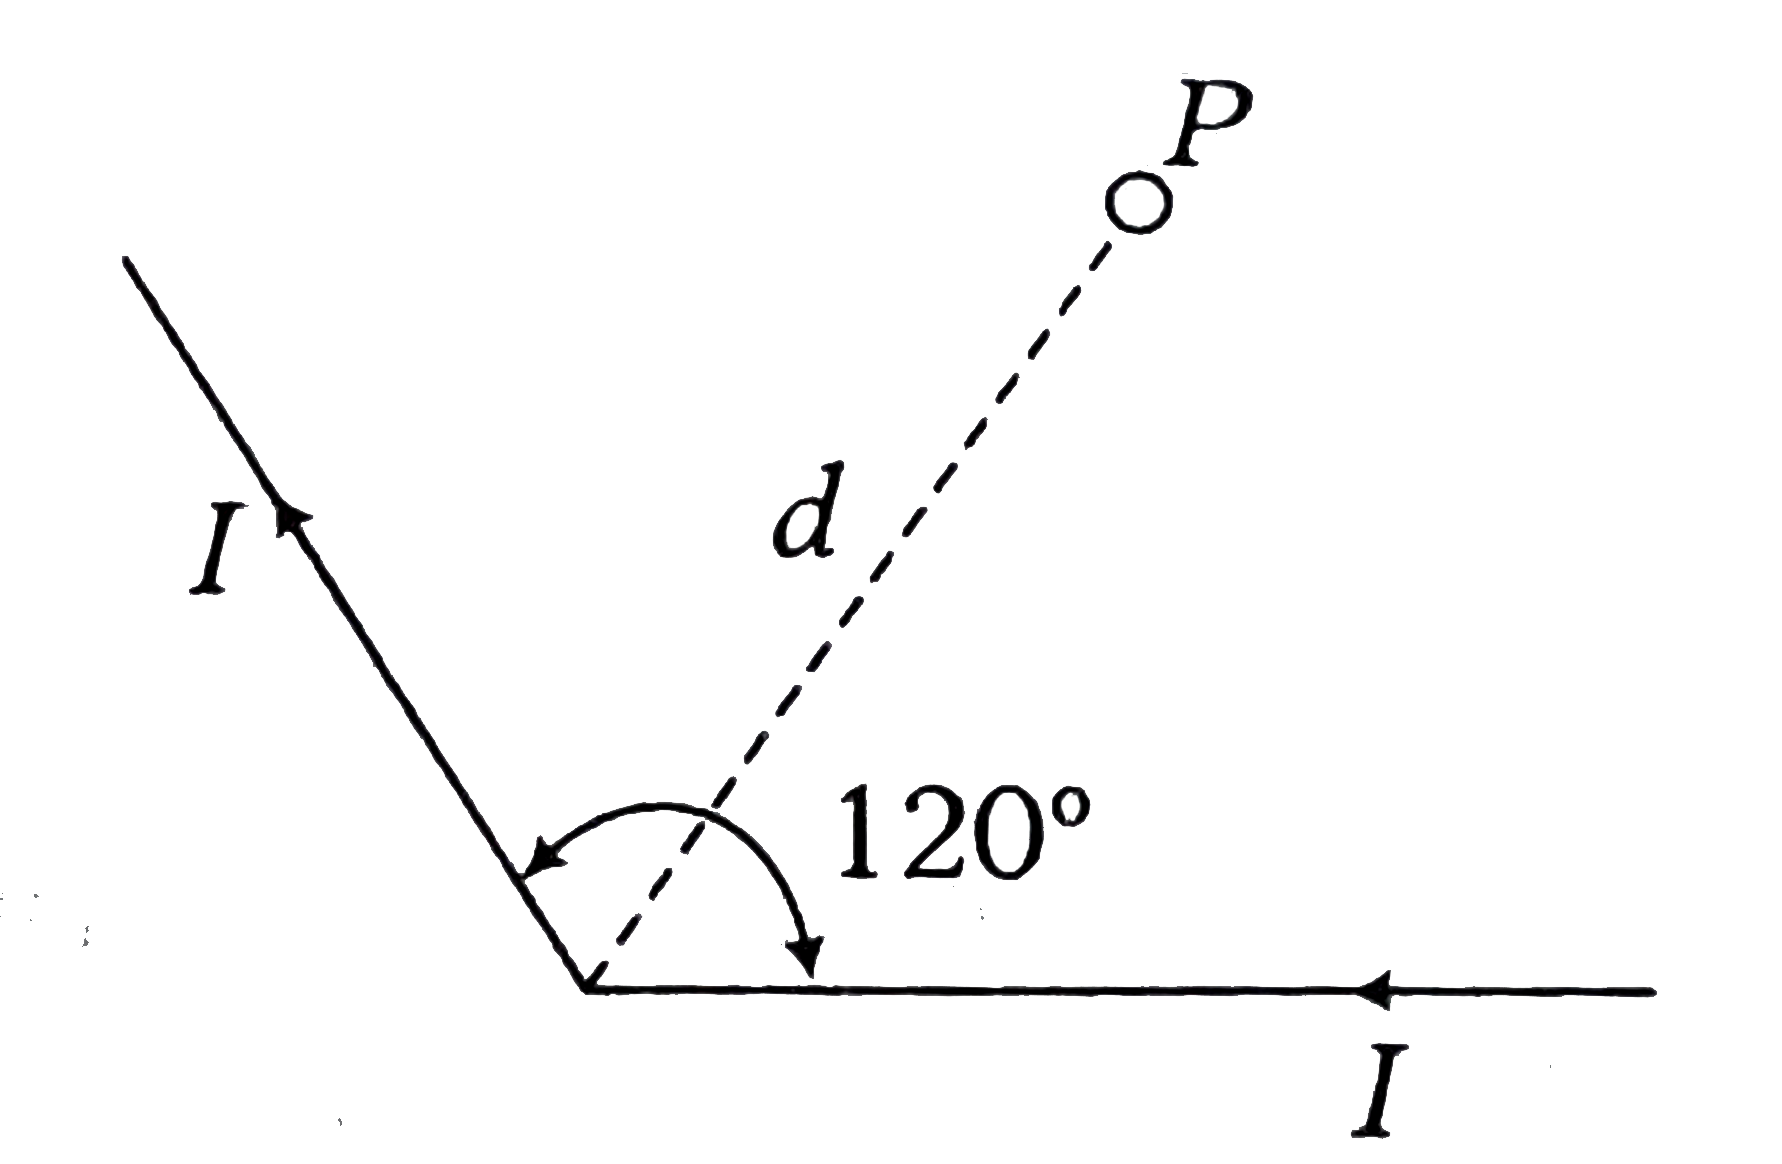 A long conducting wire carrying a current I is bent at  120^(@) ( see figure). The magnetic field B at a point P on the right bisector of bending angle at a distance d from the bend is    (mu(0) is the permeability of free space)